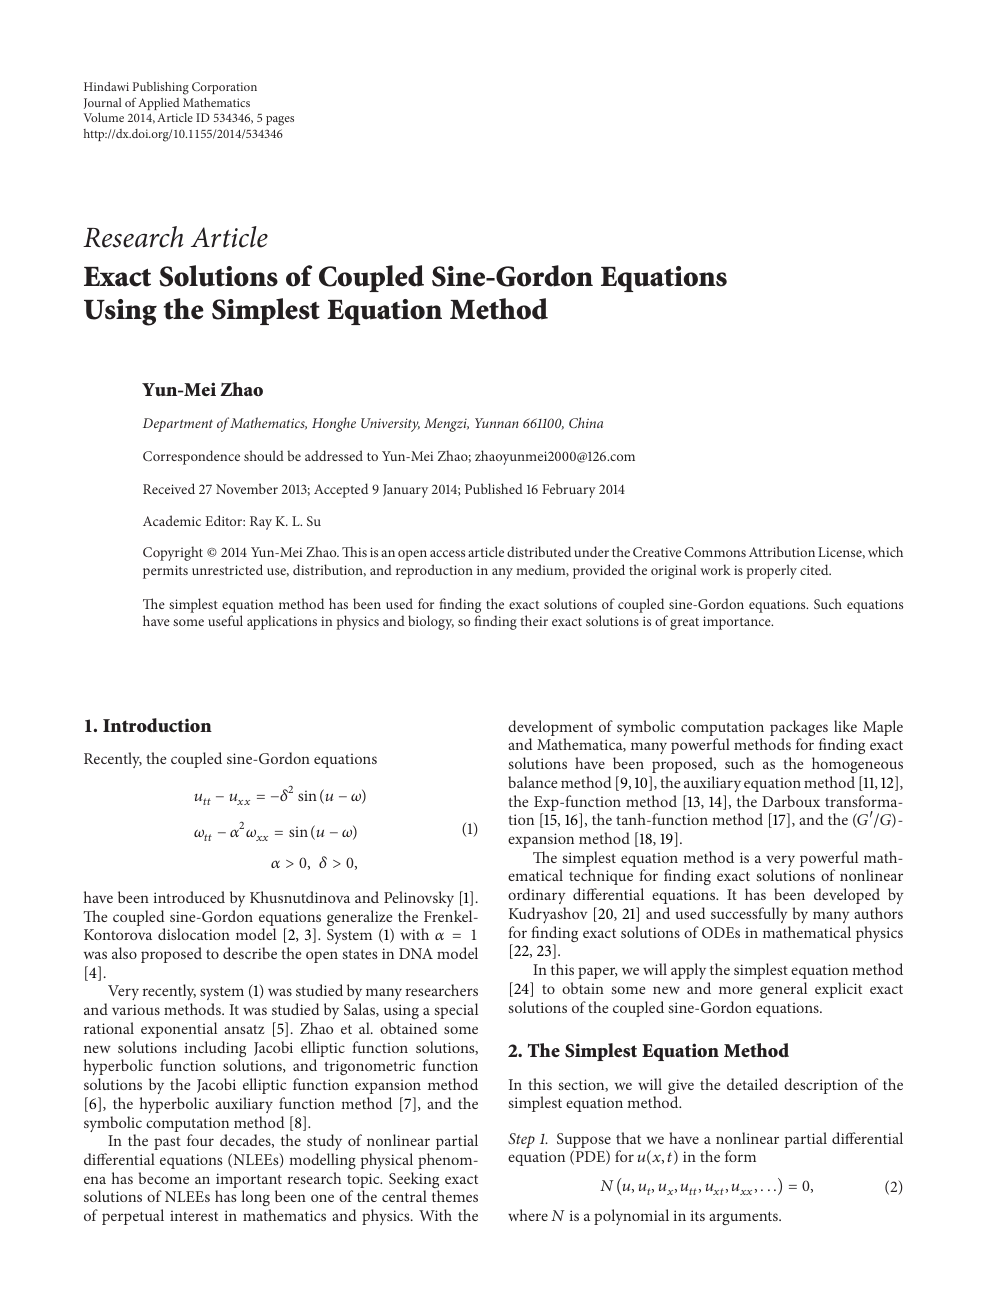 Exact Solutions Of Coupled Sine Gordon Equations Using The Simplest Equation Method Topic Of Research Paper In Mathematics Download Scholarly Article Pdf And Read For Free On Cyberleninka Open Science Hub